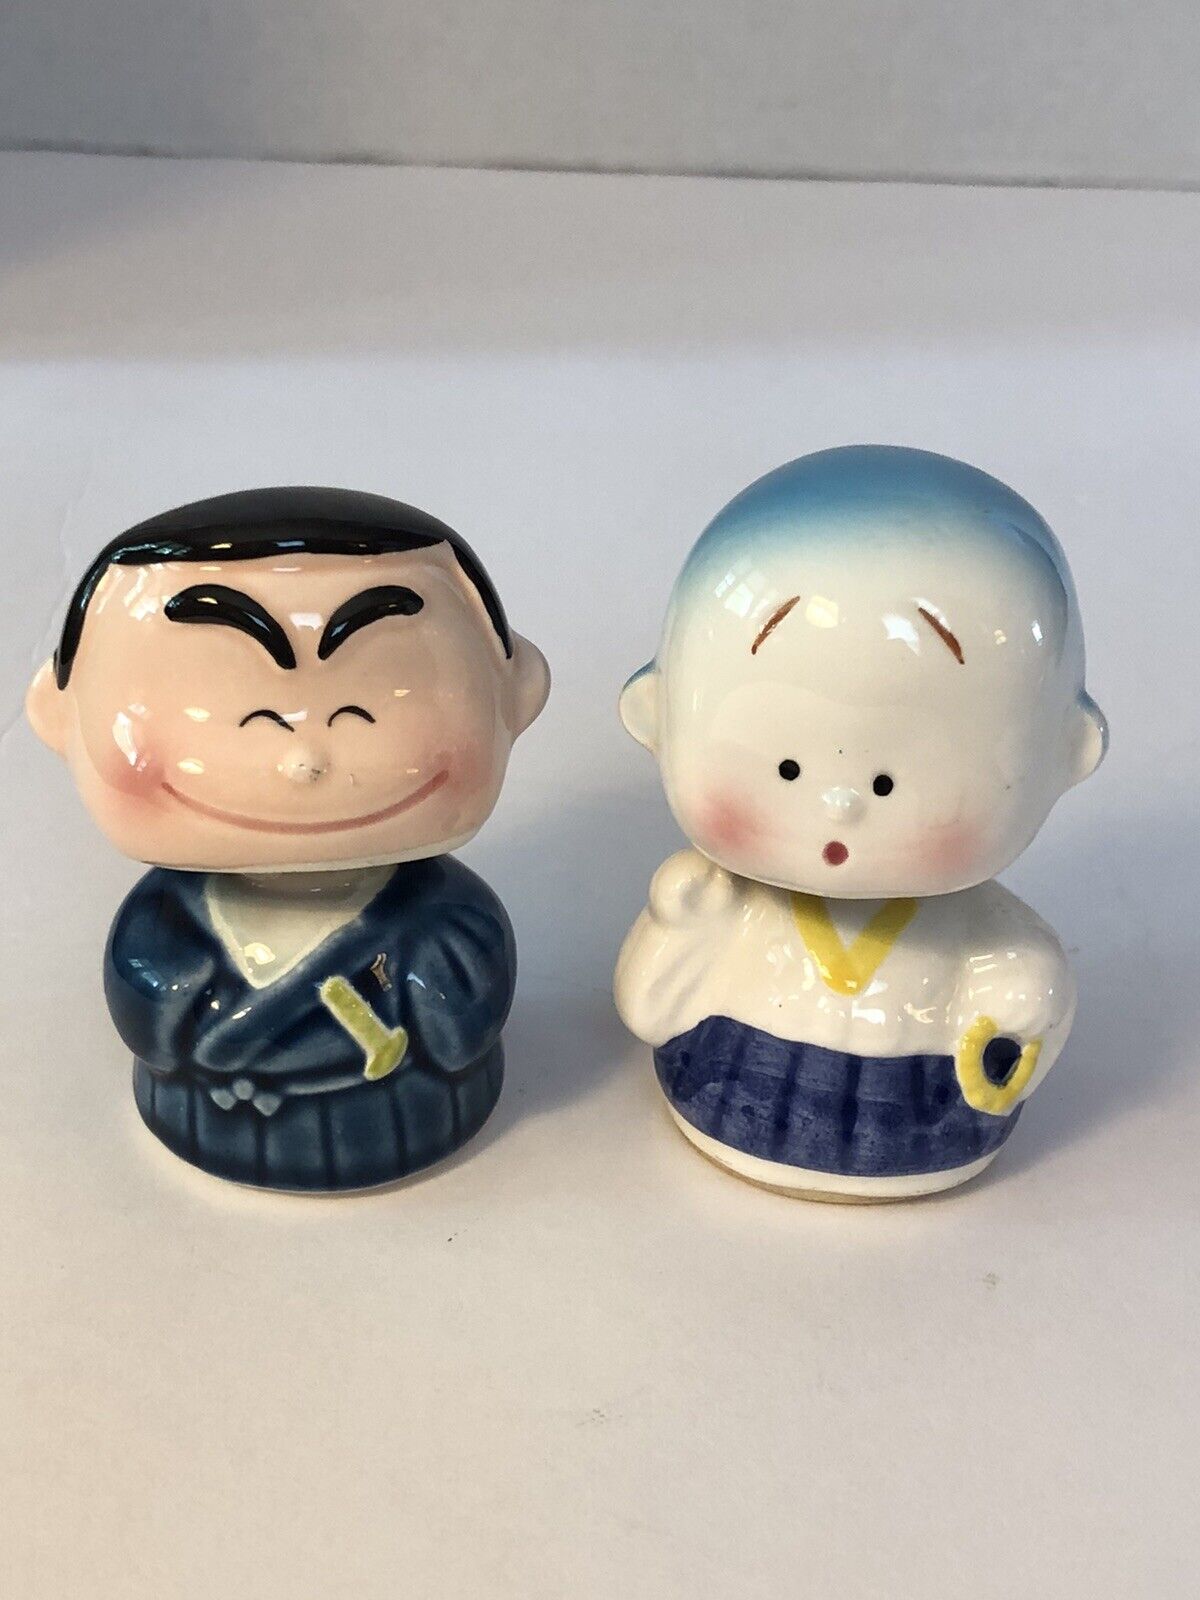 Vintage Ceramic Bobbleheads. Excellent Working Condition. Never Used.